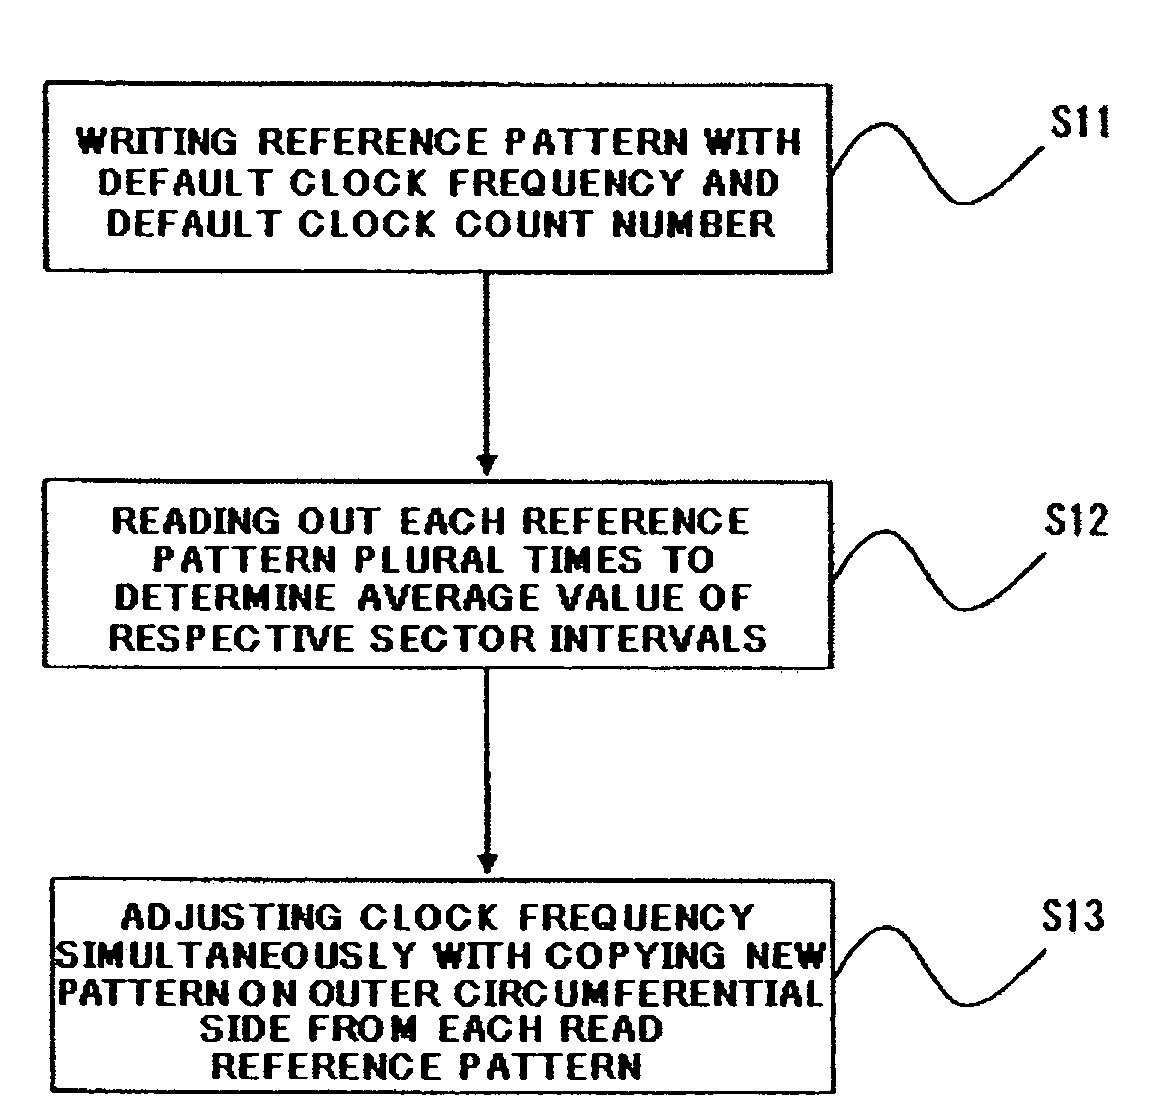 Method of writing pattern on media and data storage device